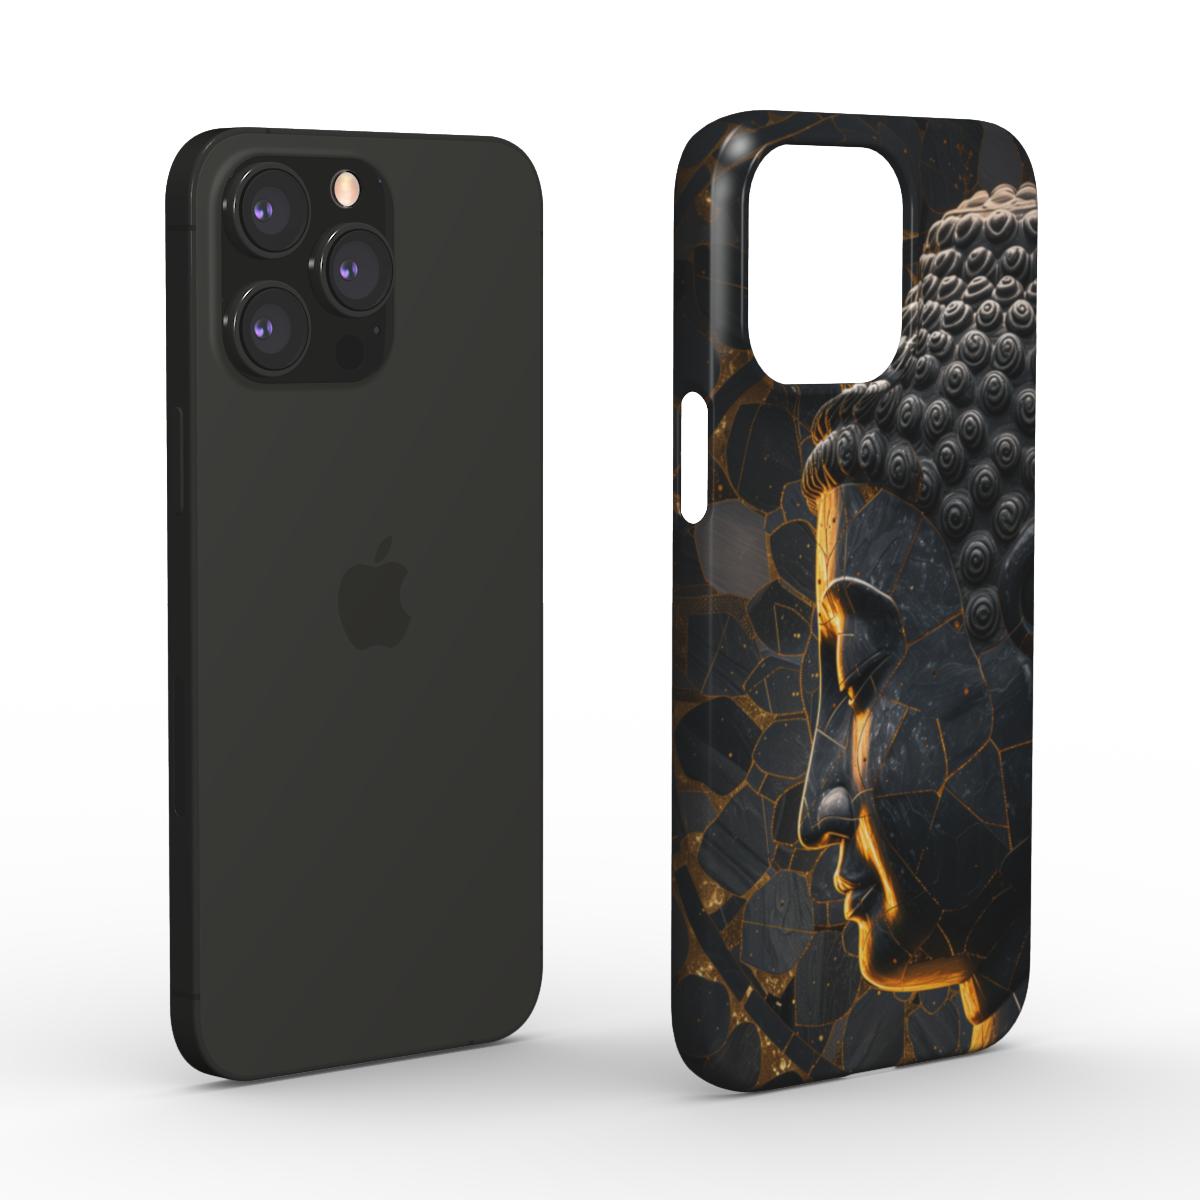 Elevate your phone’s look with the Buddha Mosaic Art Snap Case